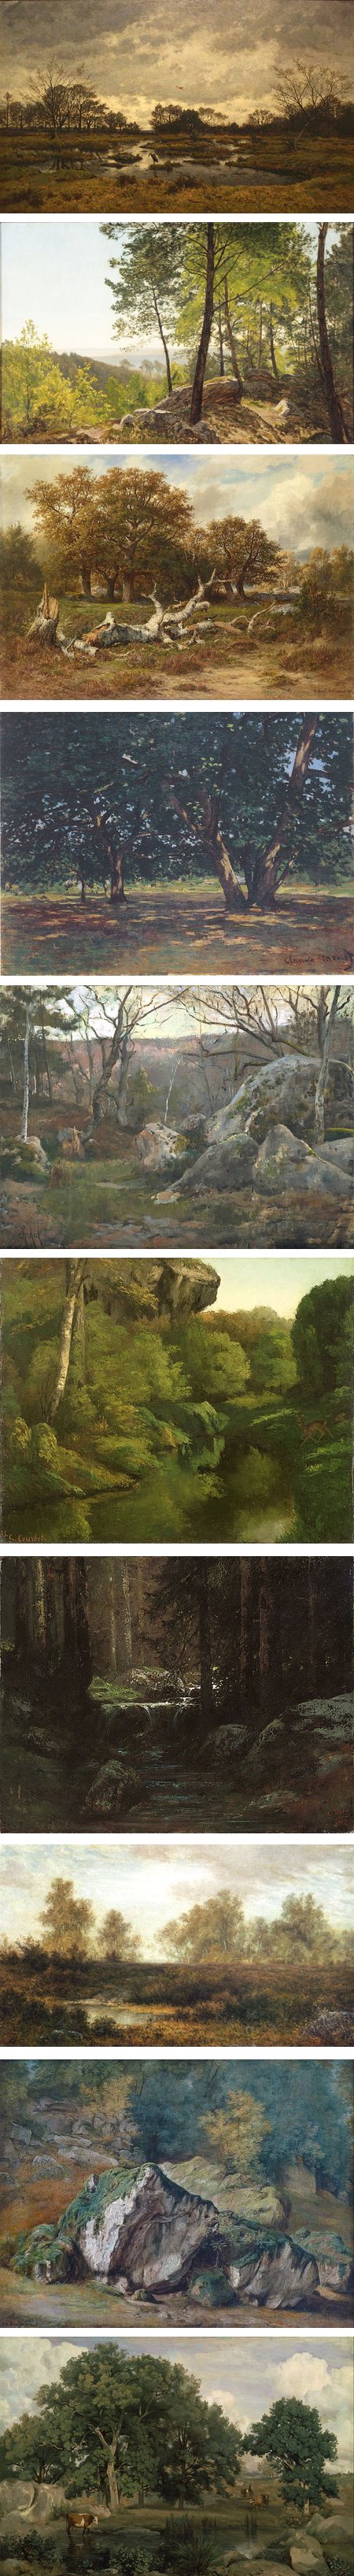 Paintings of the Forest of Fontainebleau, Alphonse Asselbergs, Christian Zacho, Francois Auguste Ortmans, Claude Monet, George Charles Aid, Gustave Courbet, Gustave Dore, Peter Burnit, Theodore Rousseau, Jean-Baptiste-Camille Corot